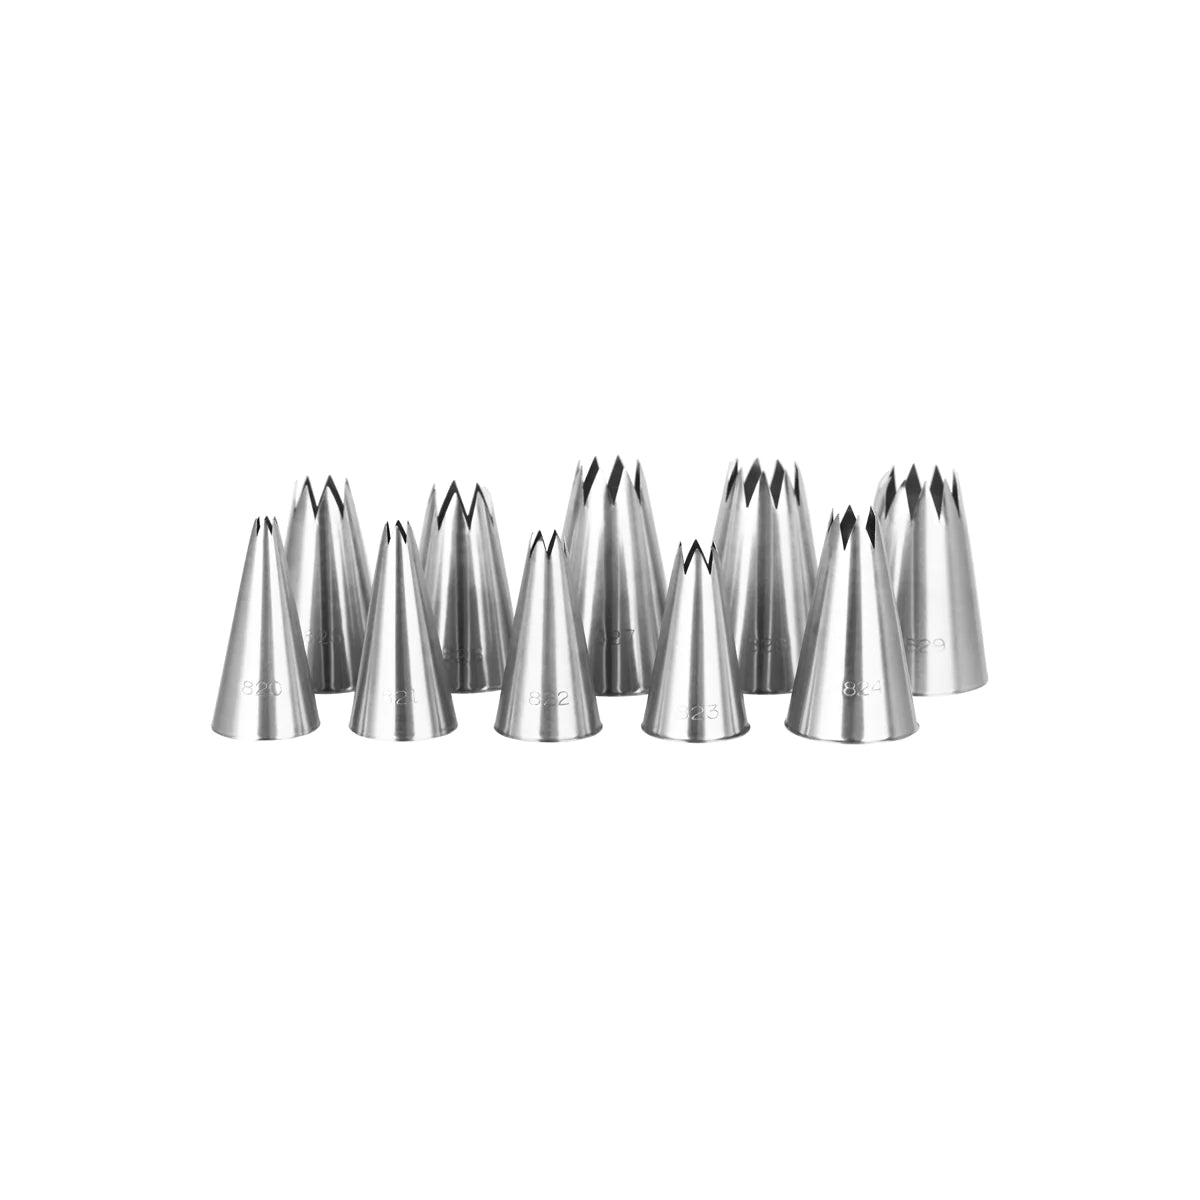 Piping Tube Star Set 10pc Stainless Steel